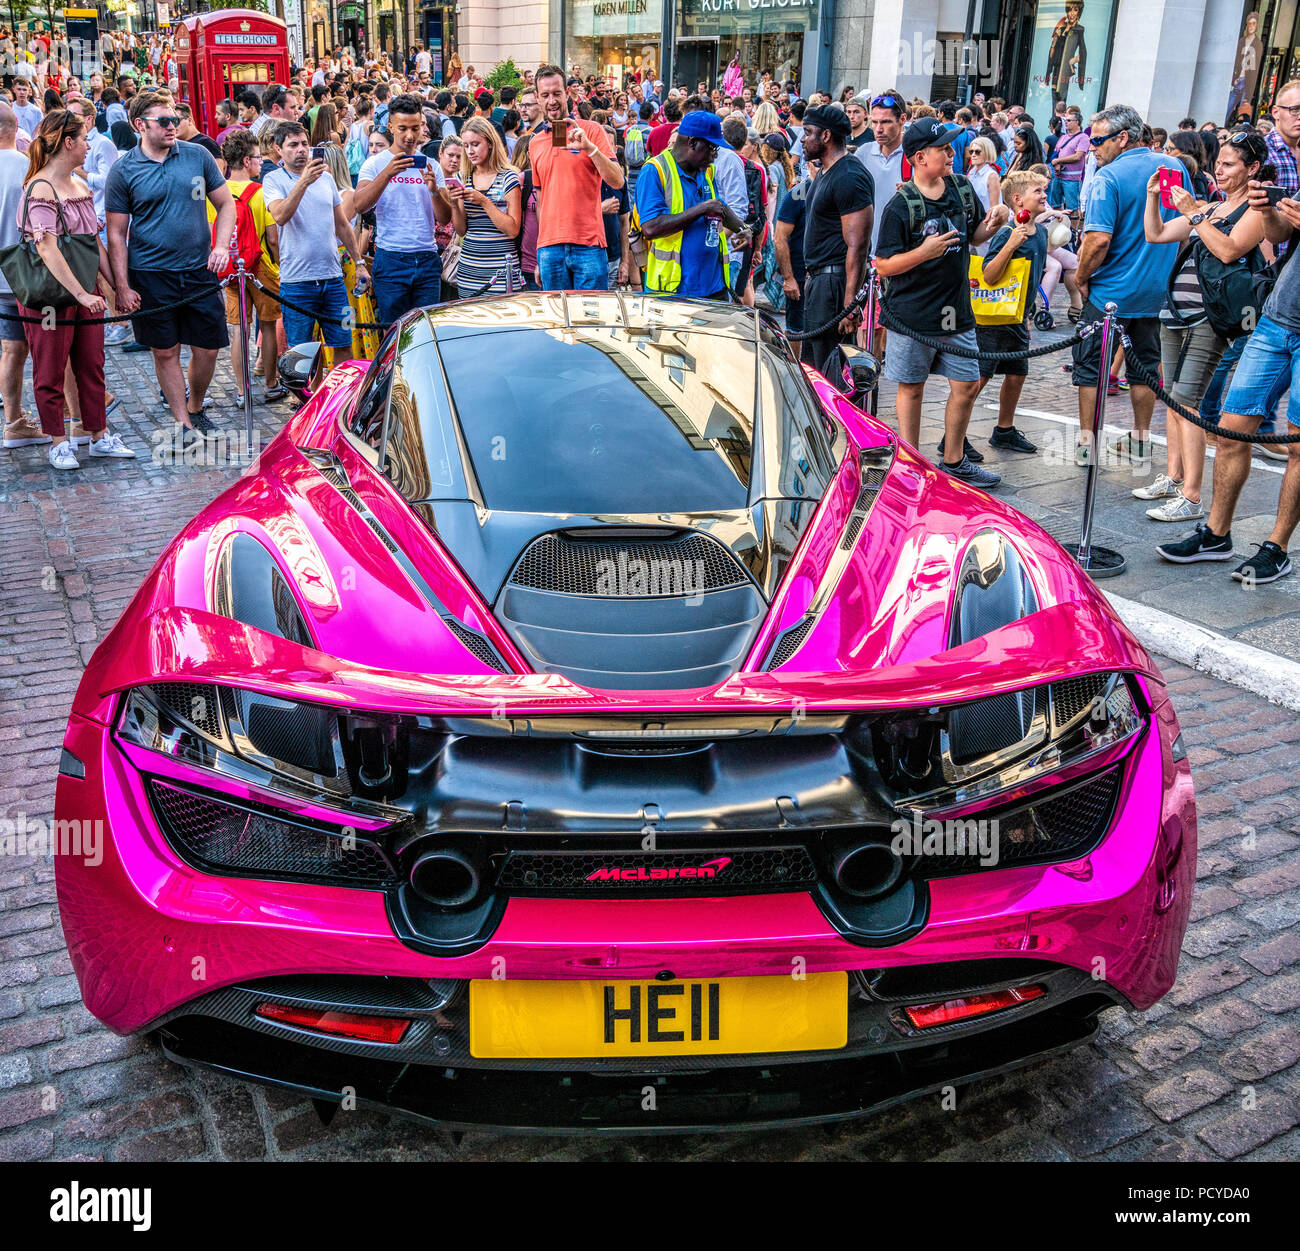 4 August 2018 - London, England. Pink supercar McLaren displayed in Covent Garden, London for the Gumball 3000 rally event. Stock Photo